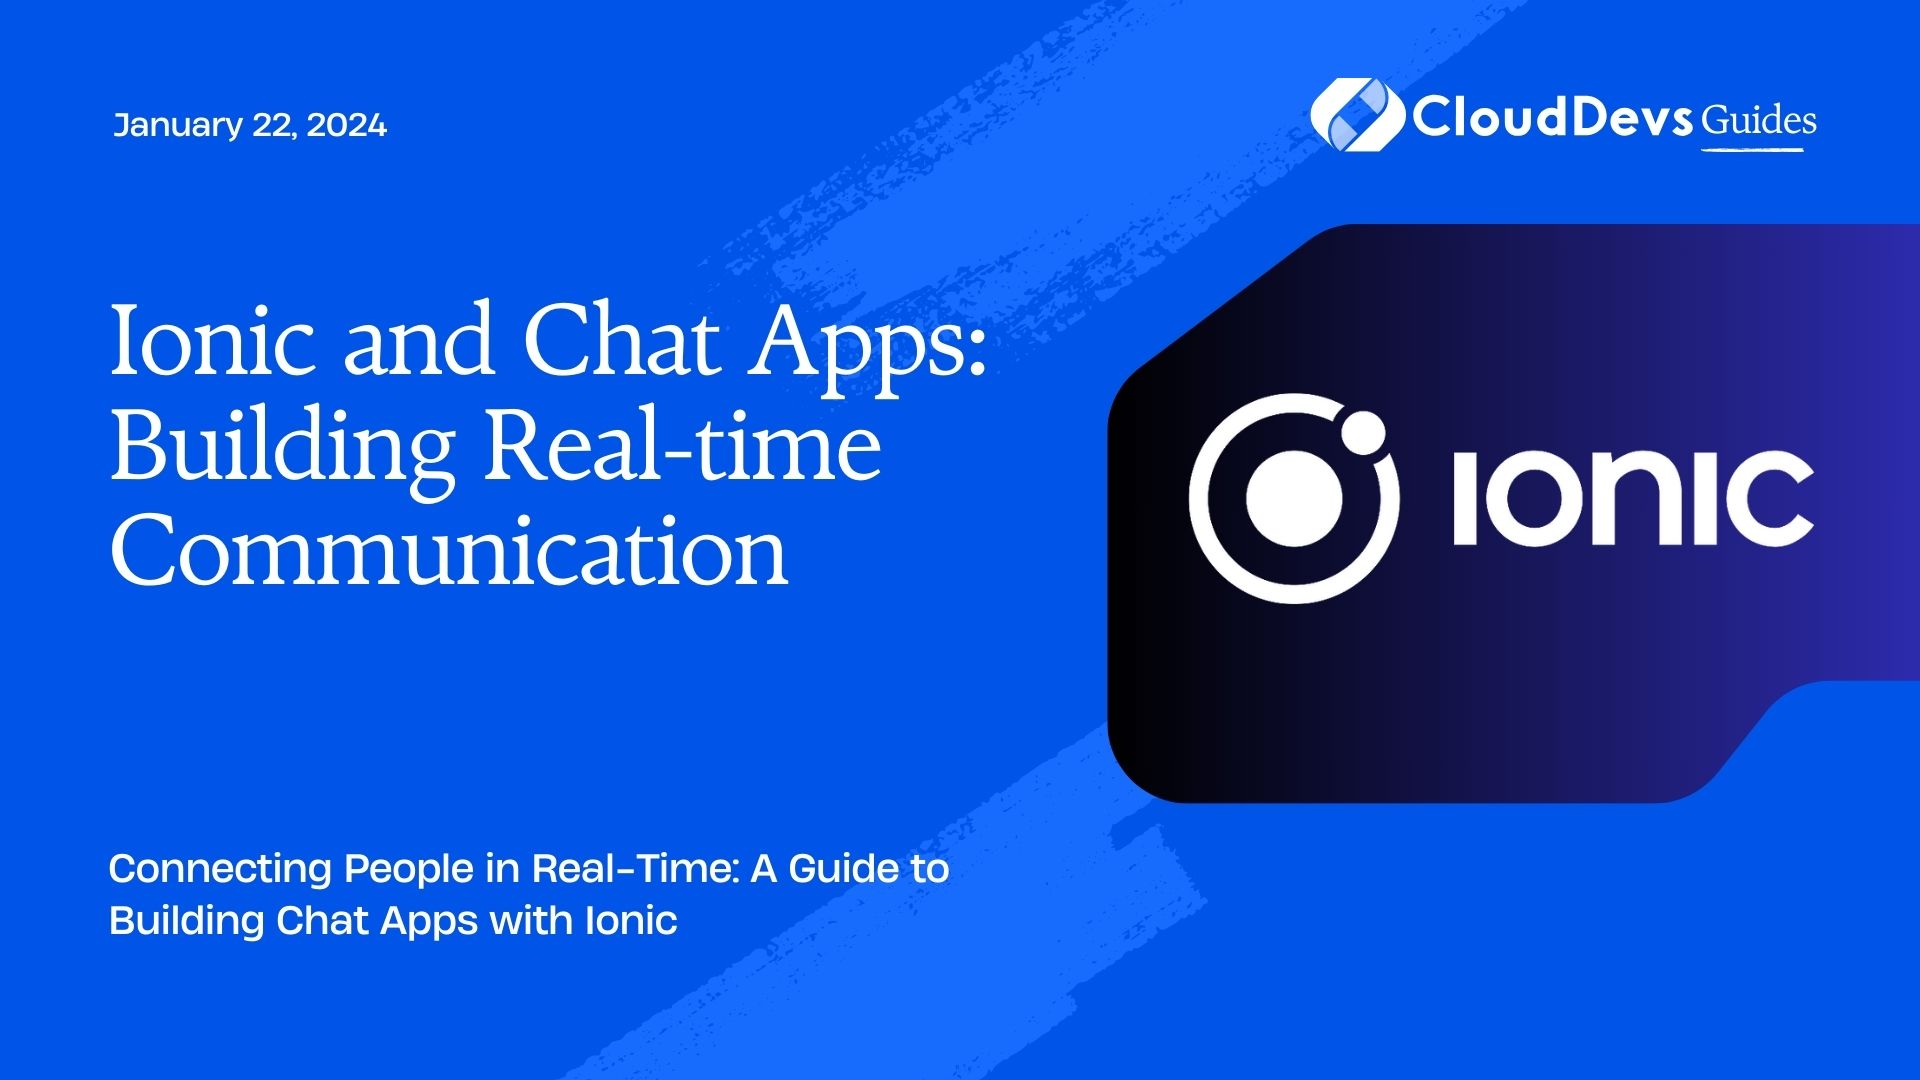 Ionic and Chat Apps: Building Real-time Communication